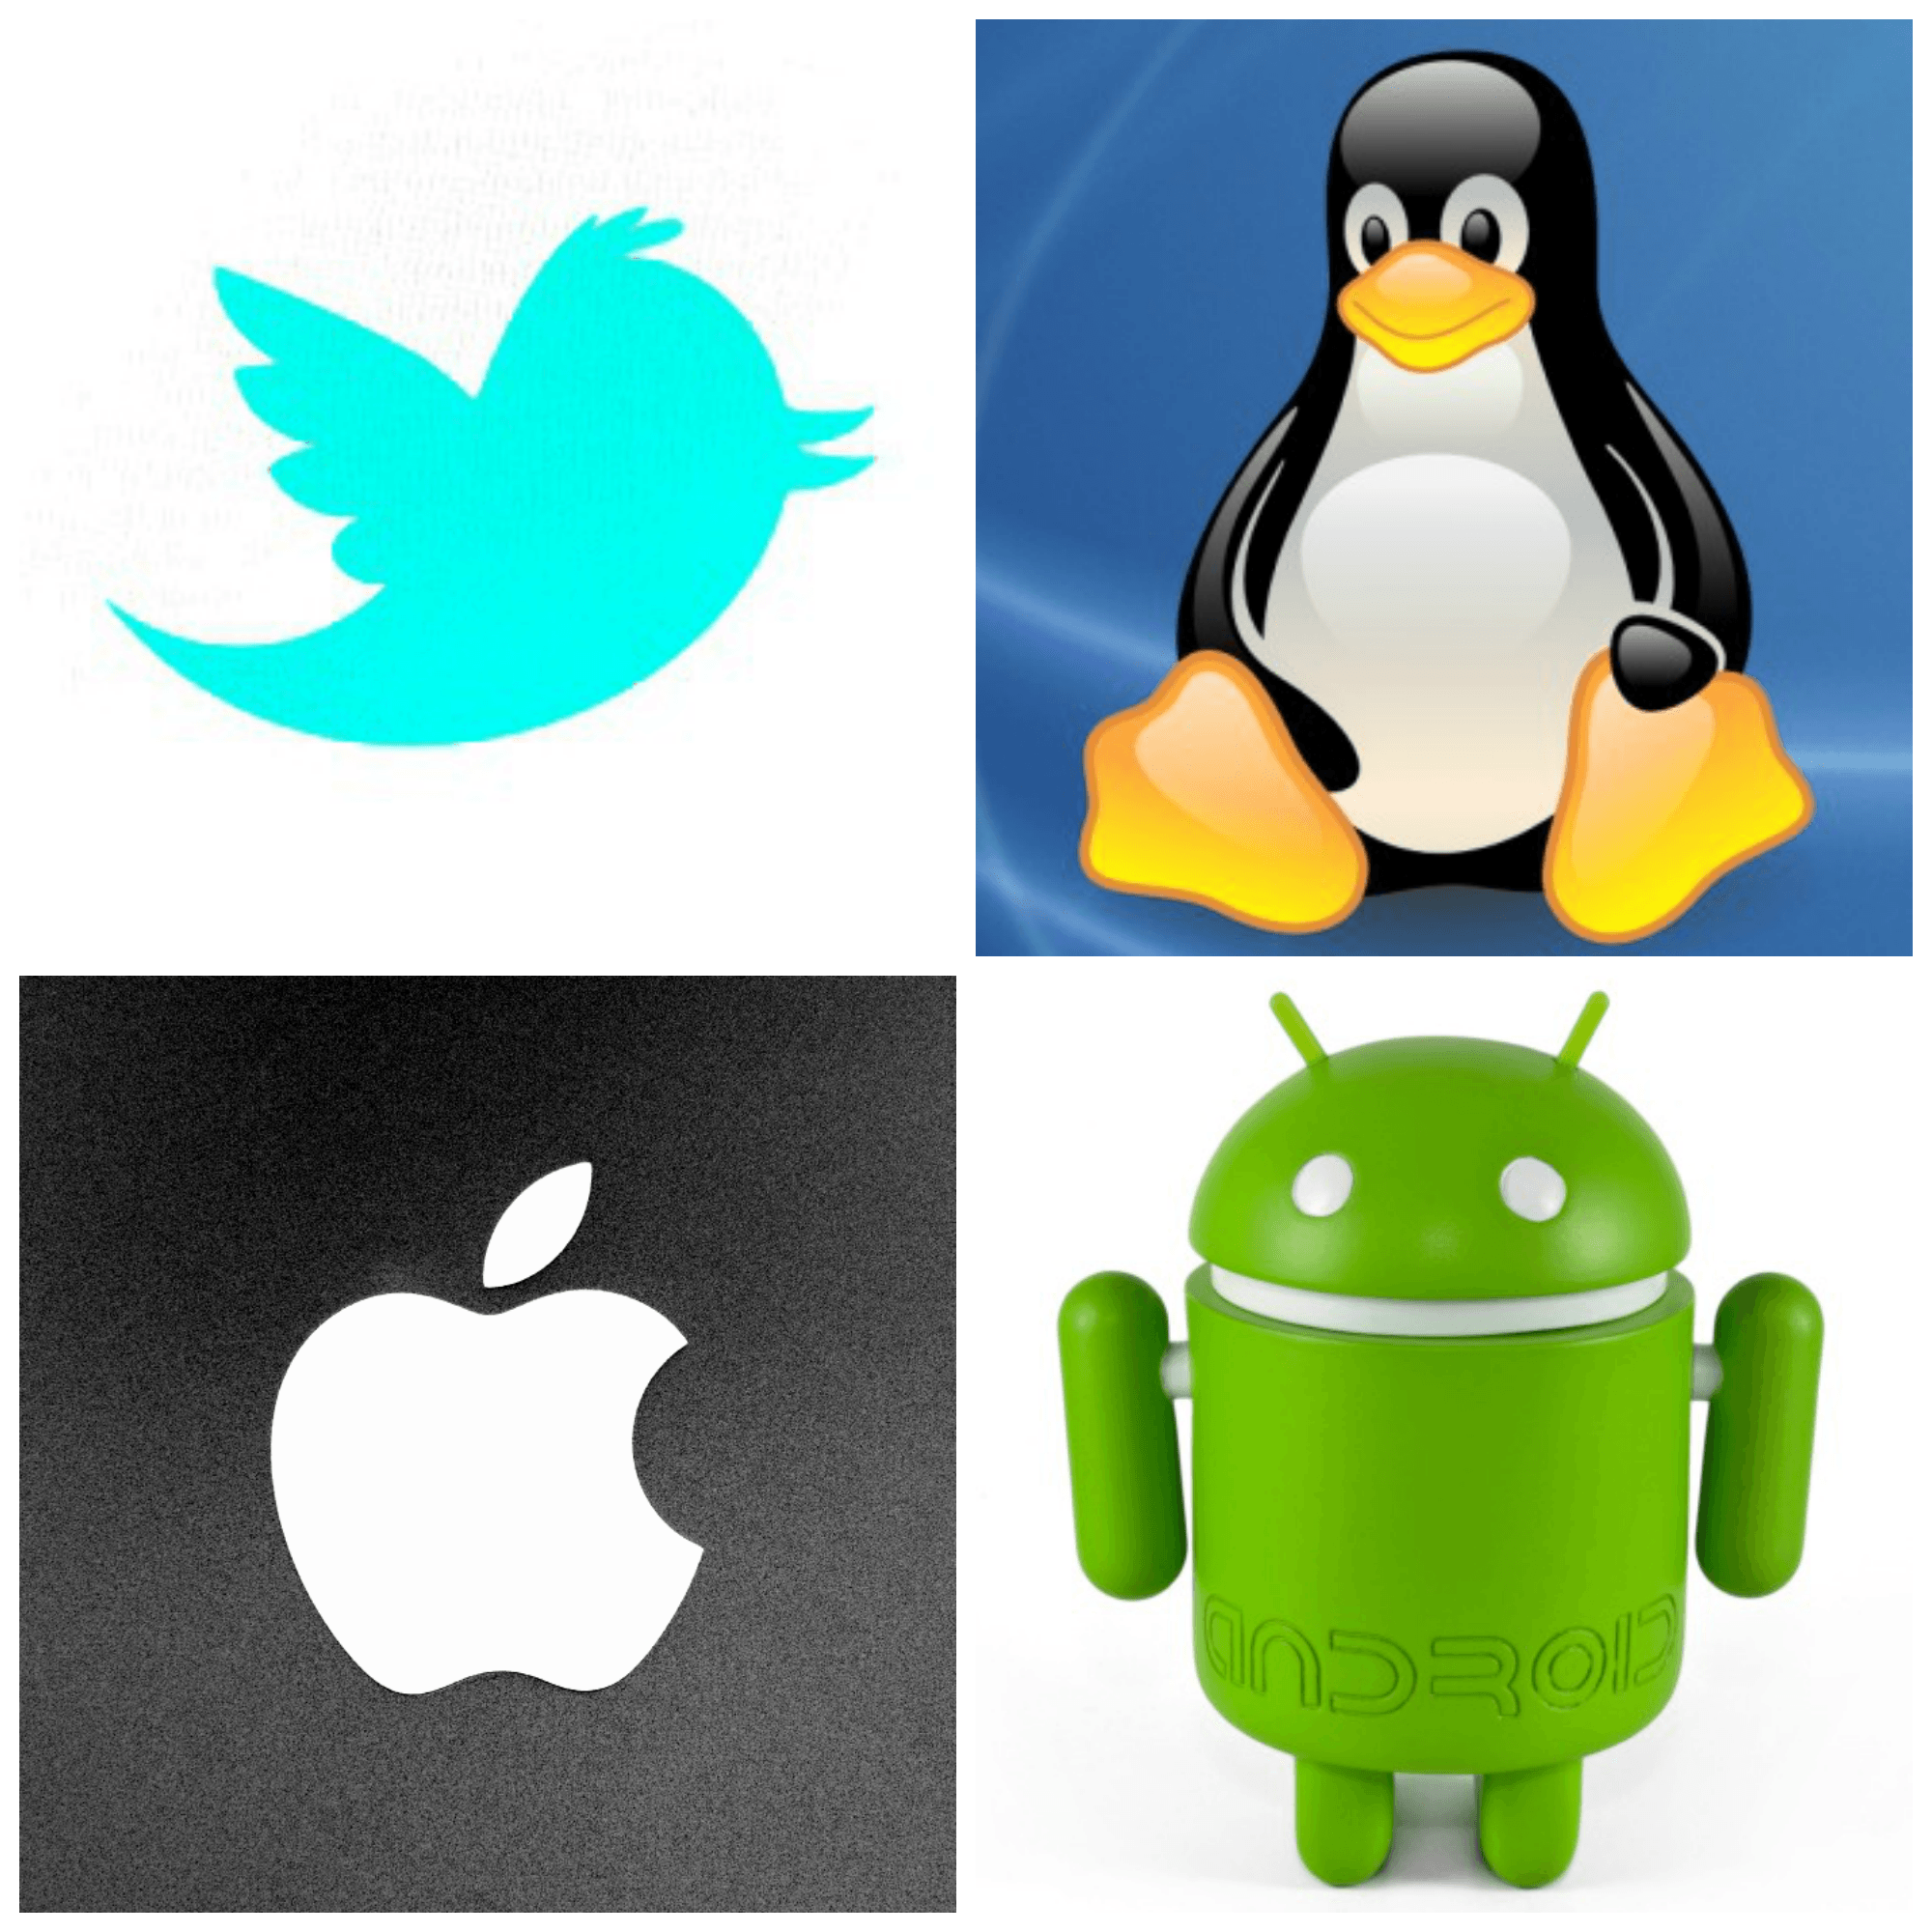 Penguin Logo - The stories behind well-known tech logos and mascots - Maxxor Blog